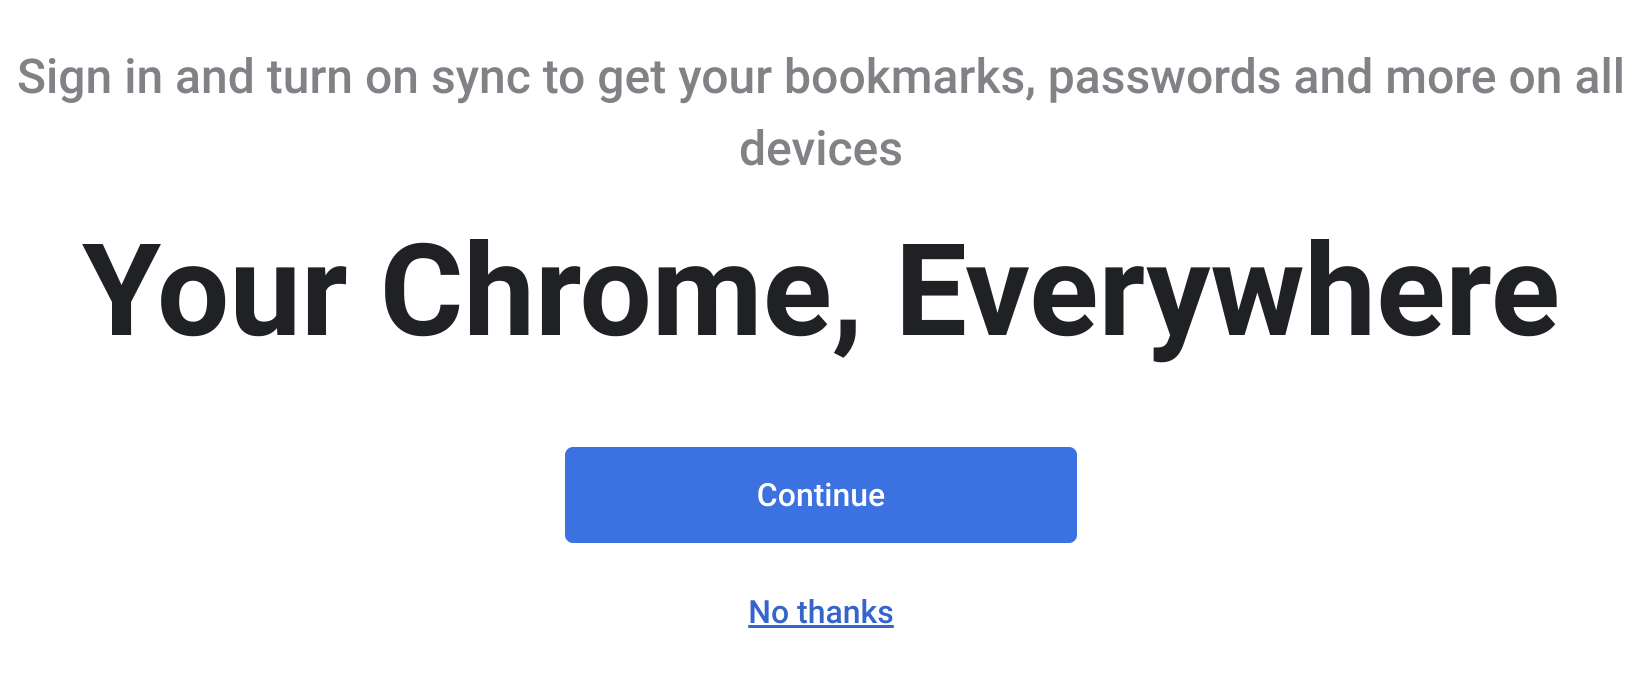 Screenshot of Chrome’s welcome screen with the text “Sign in and turn on sync to get your bookmarks, passwords and more on all devices. Your Chrome, Everywhere” and the highlighted button saying “Continue.”